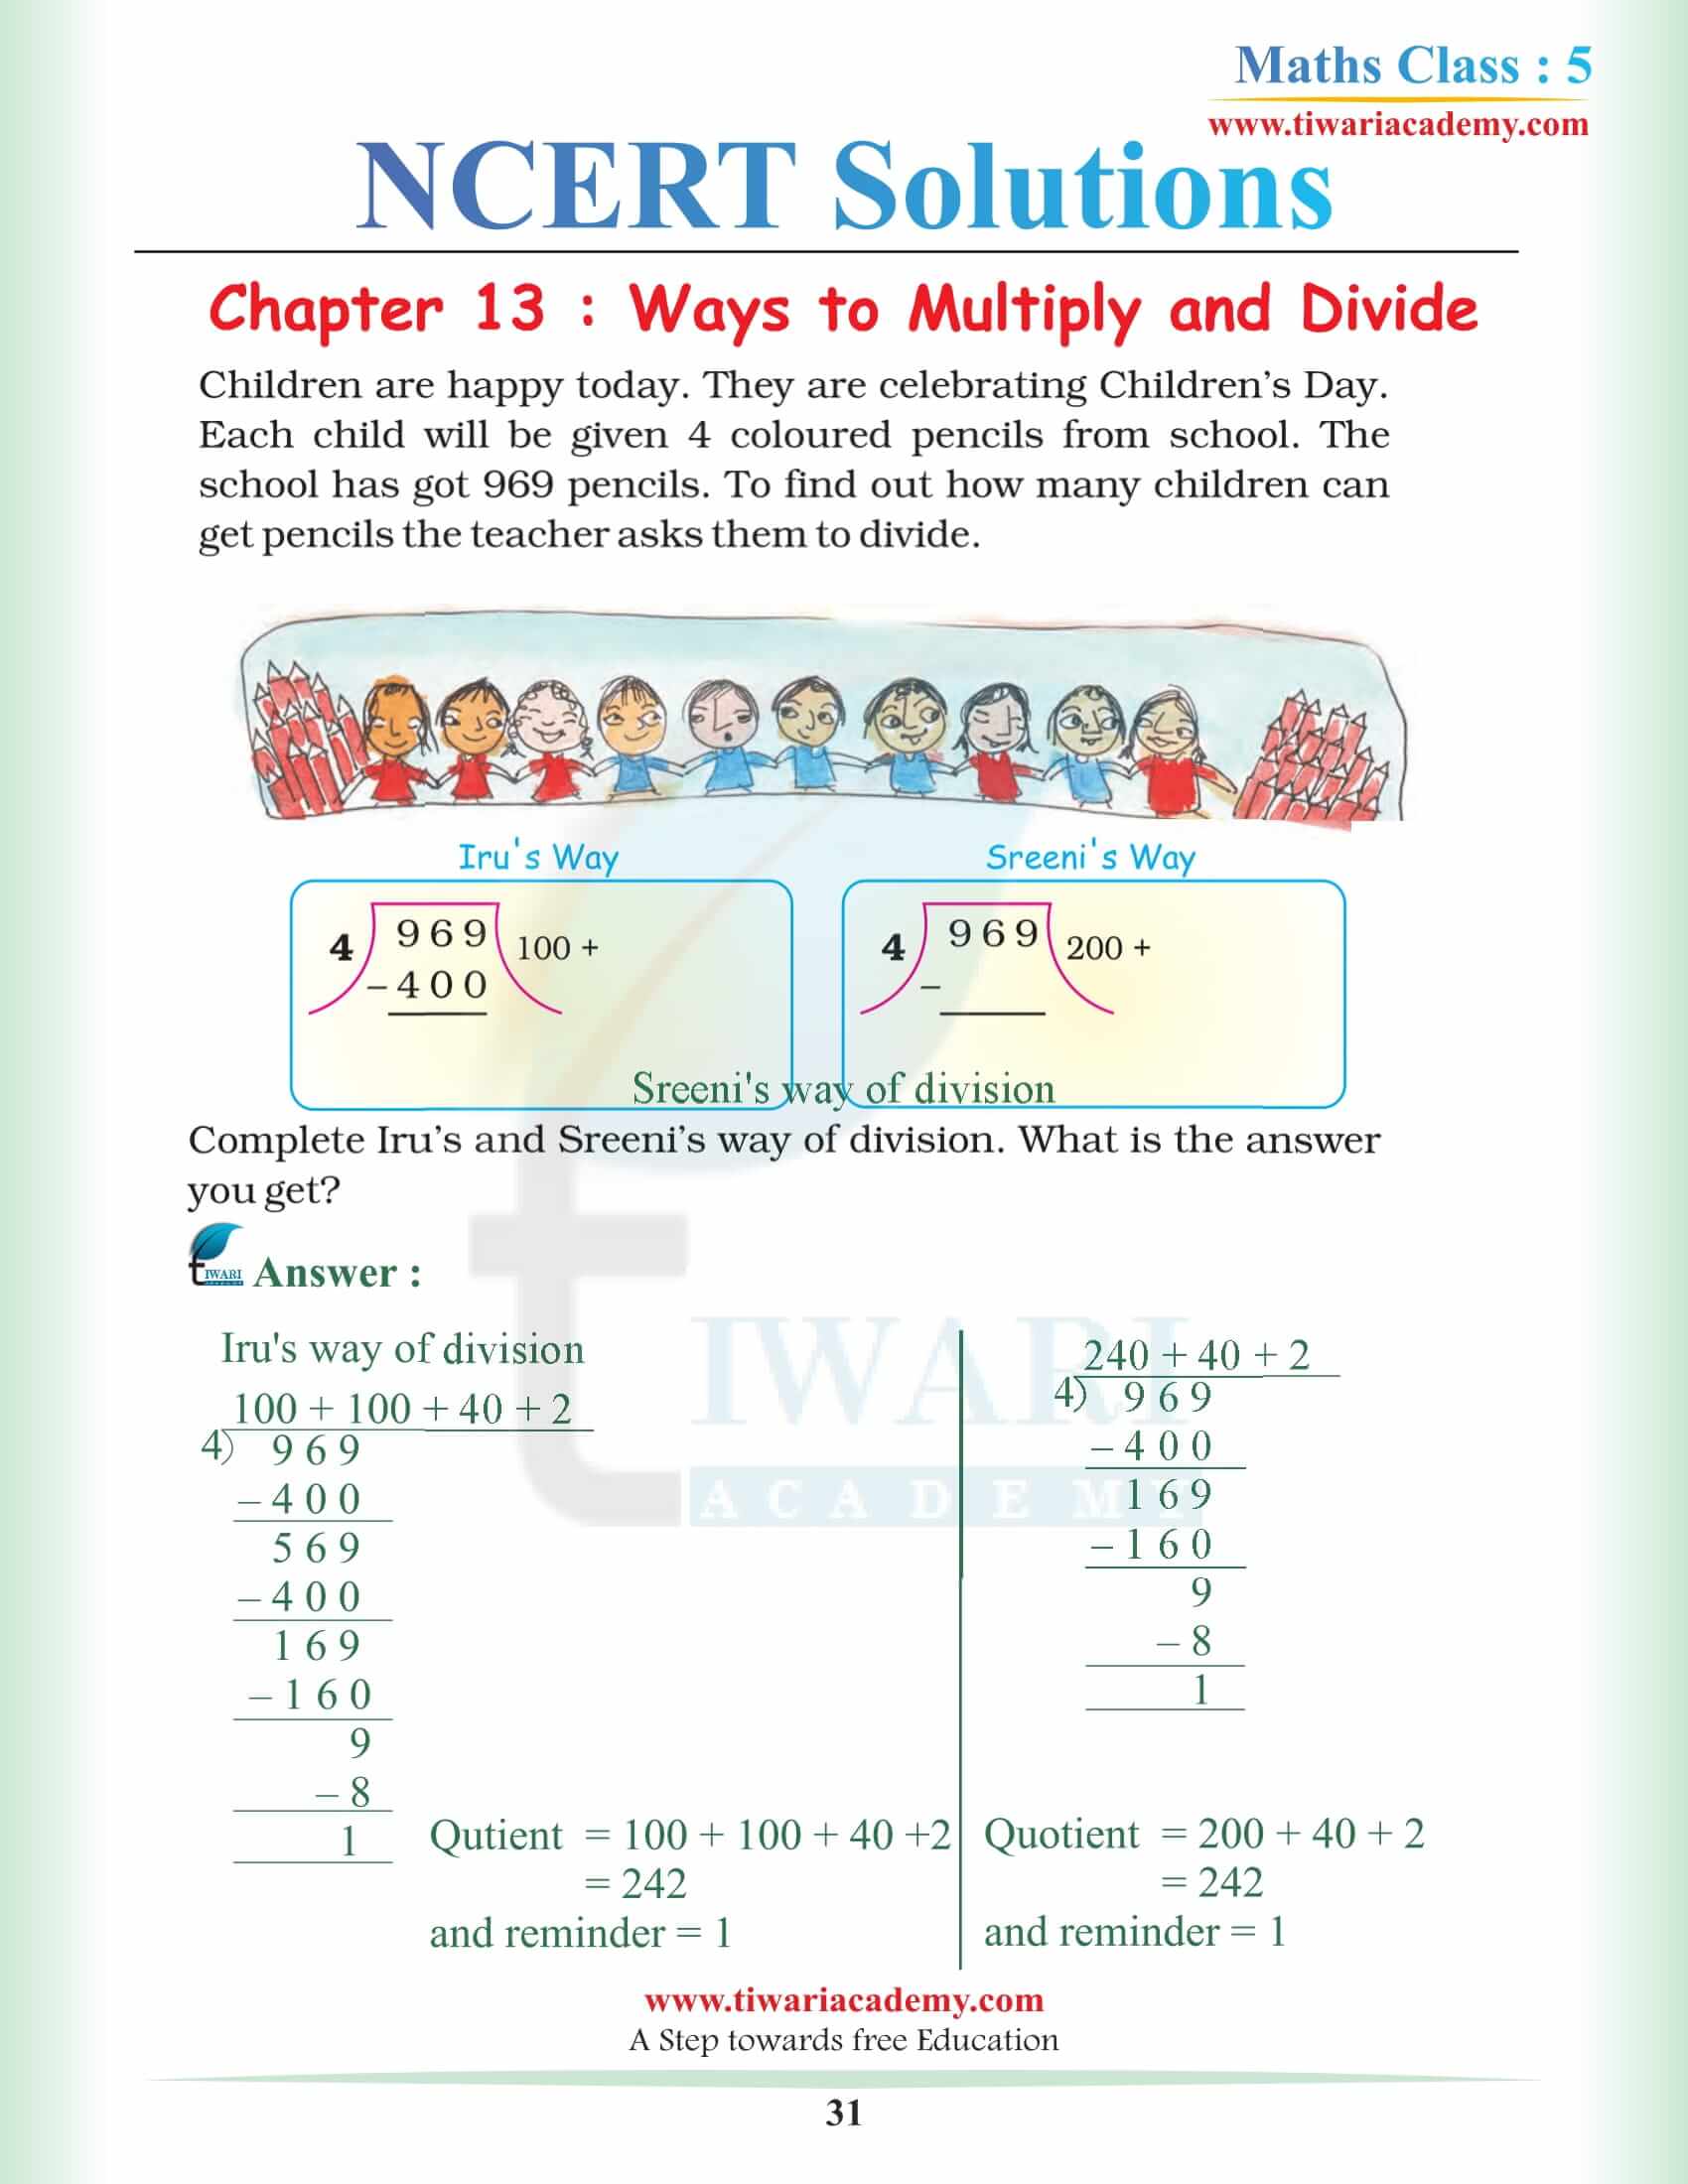 Maths 5th Class Chapter 13 NCERT Question Answers